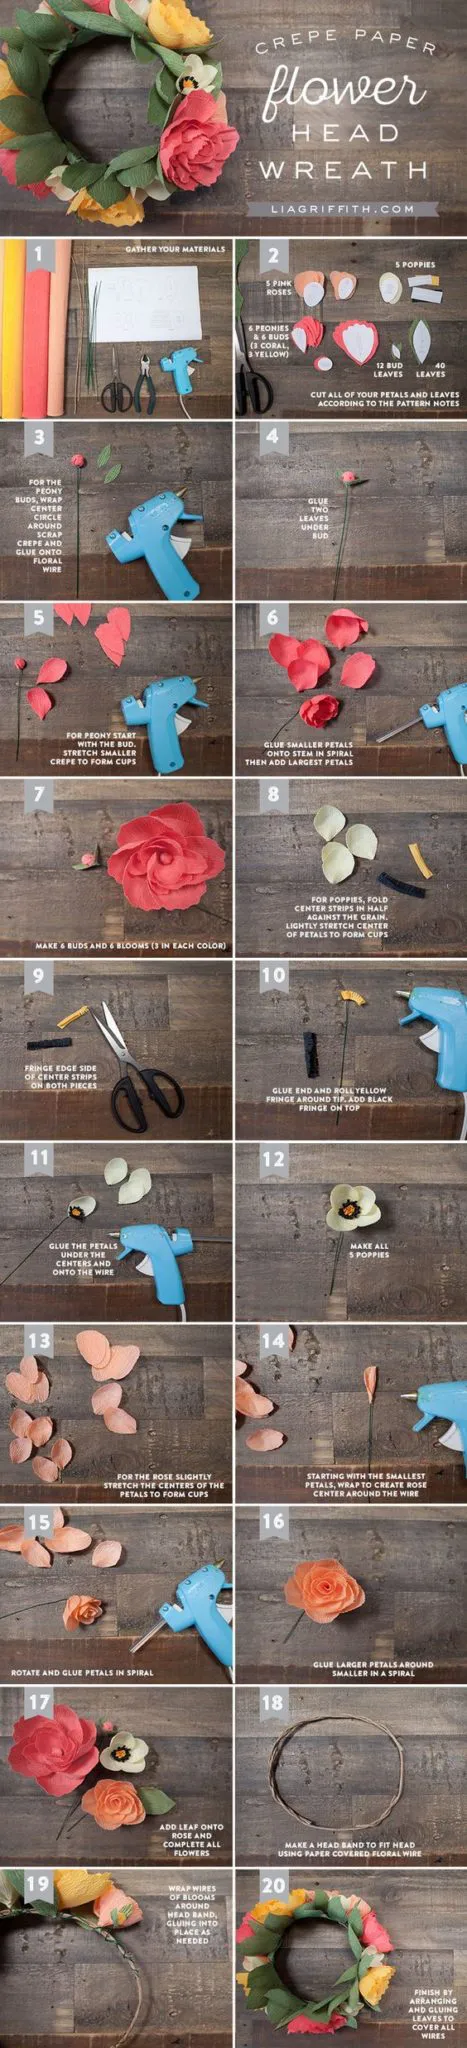 DIY Crepe Paper Flower Head Wreath Pictures, Photos, and Images for Facebook, Tumblr, Pinterest, and Twitter: 